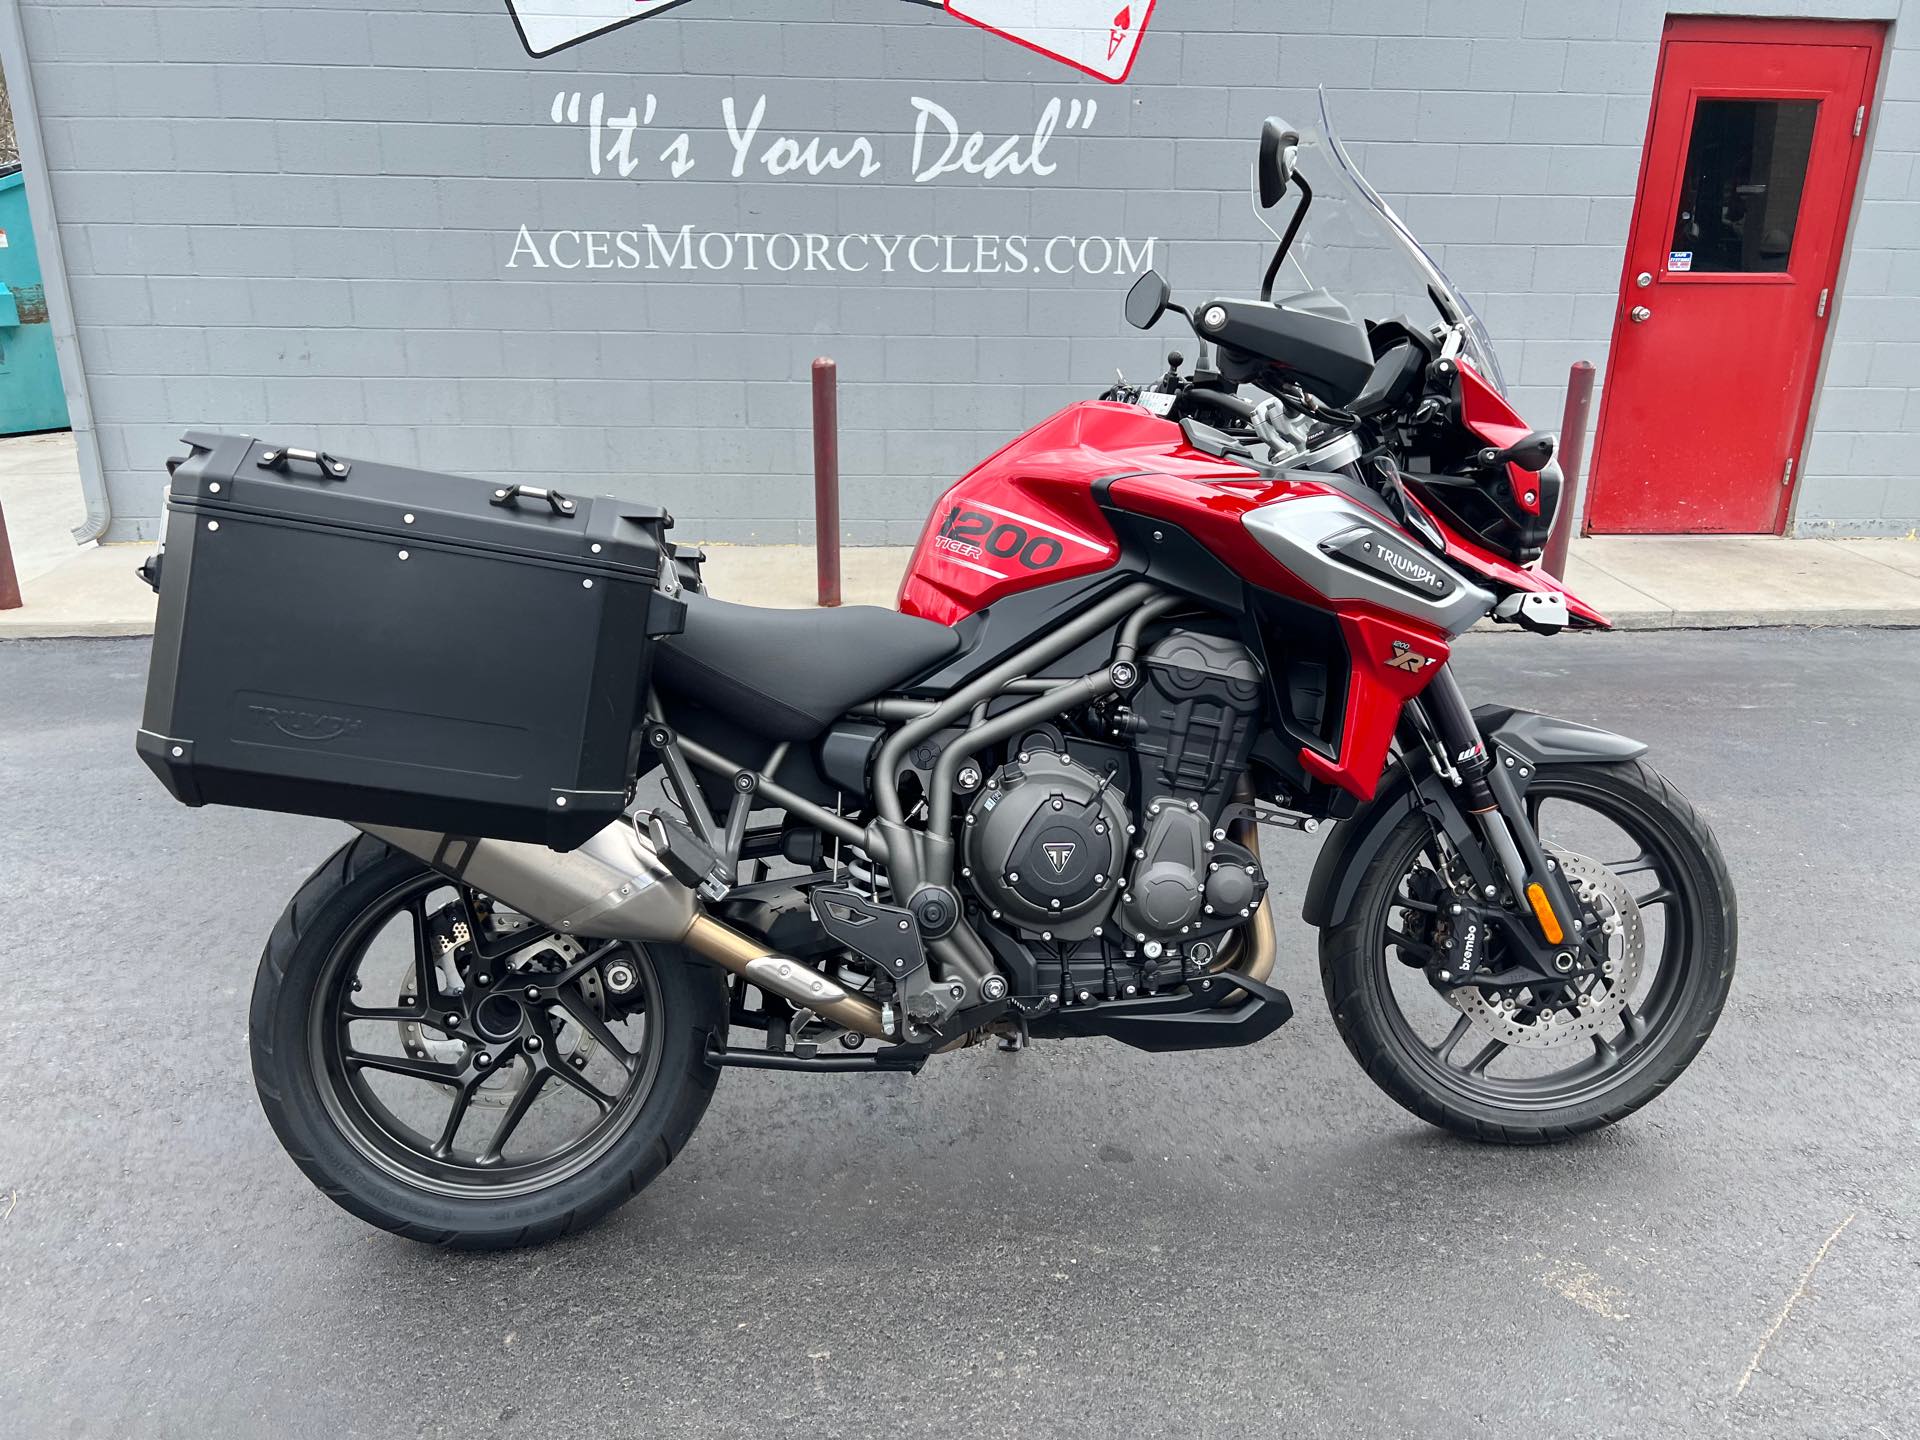 2018 Triumph Tiger 1200 XRT at Aces Motorcycles - Fort Collins